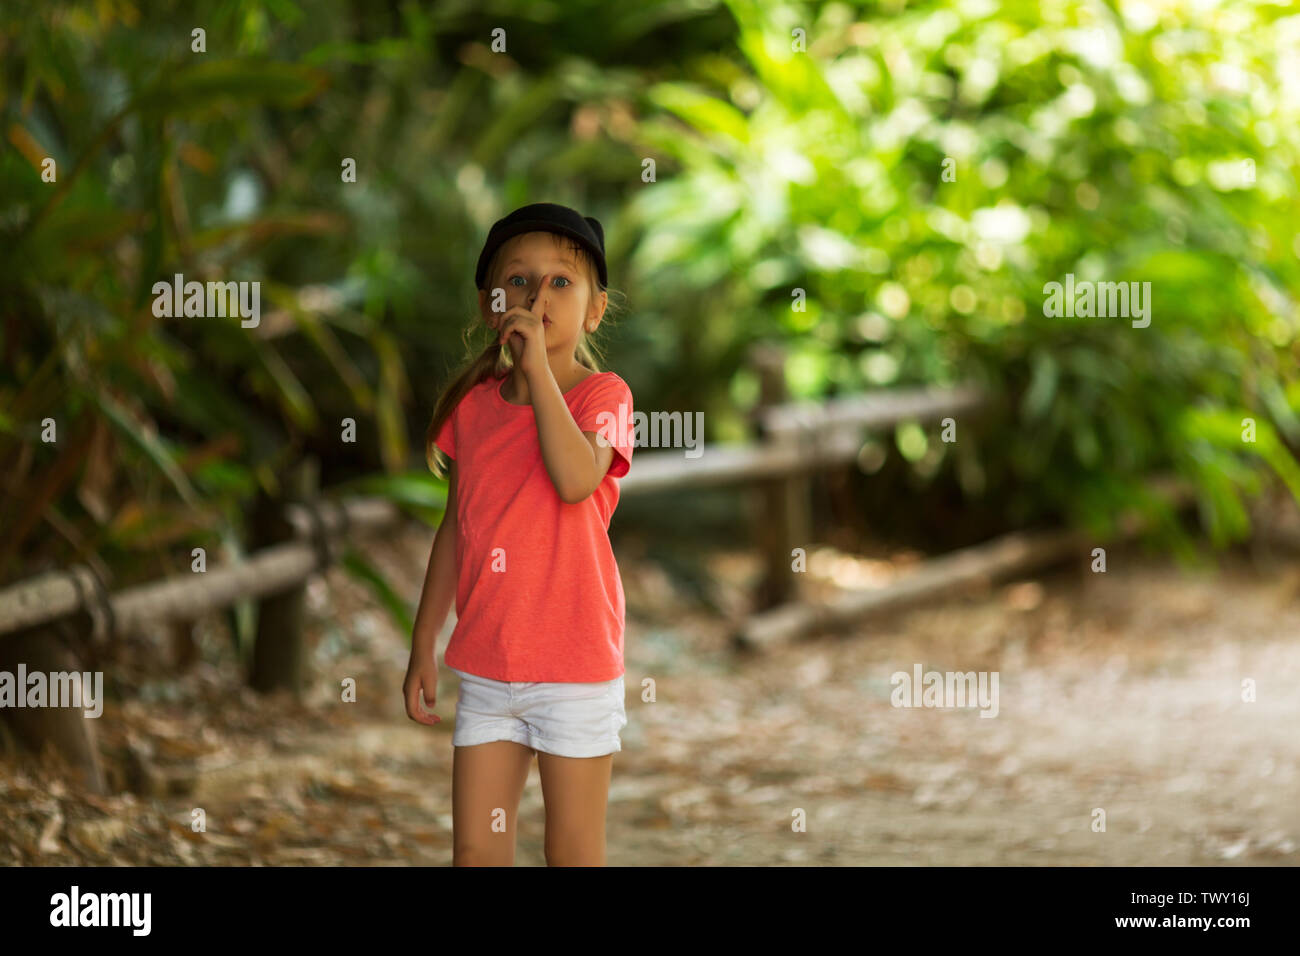 Girl showing quiet sign while walking outdoors Stock Photo